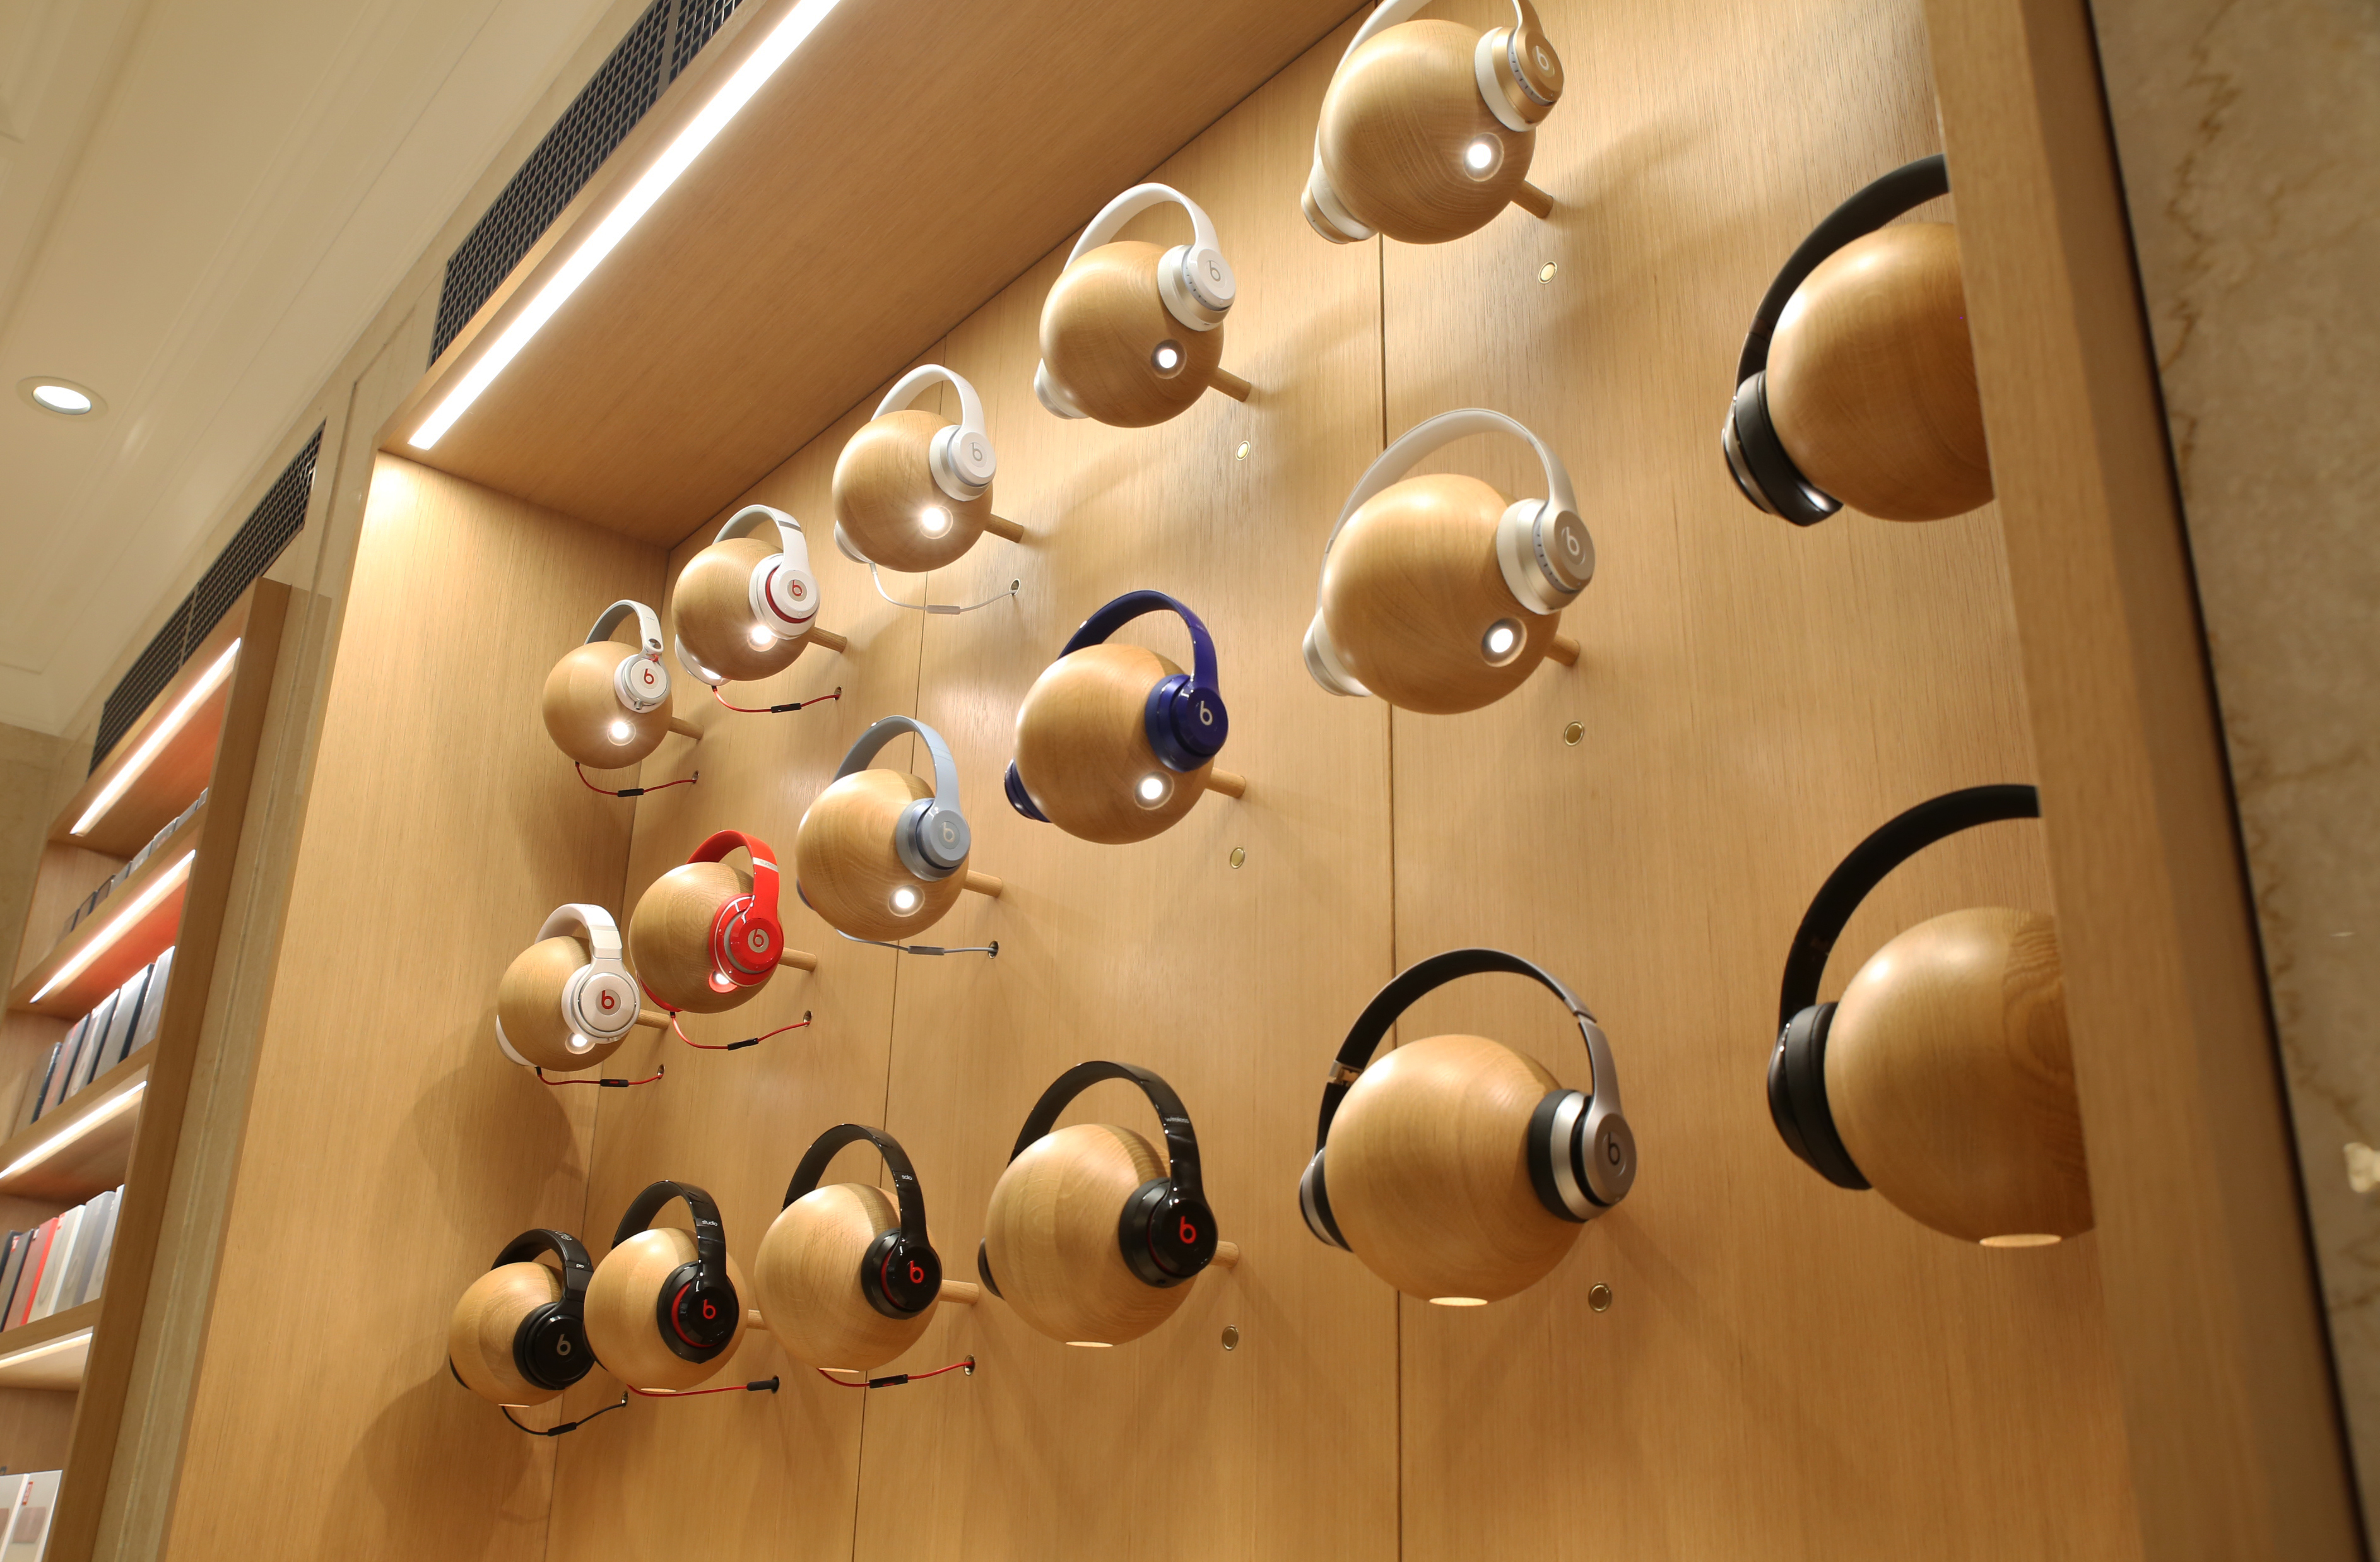 can you buy beats at the apple store